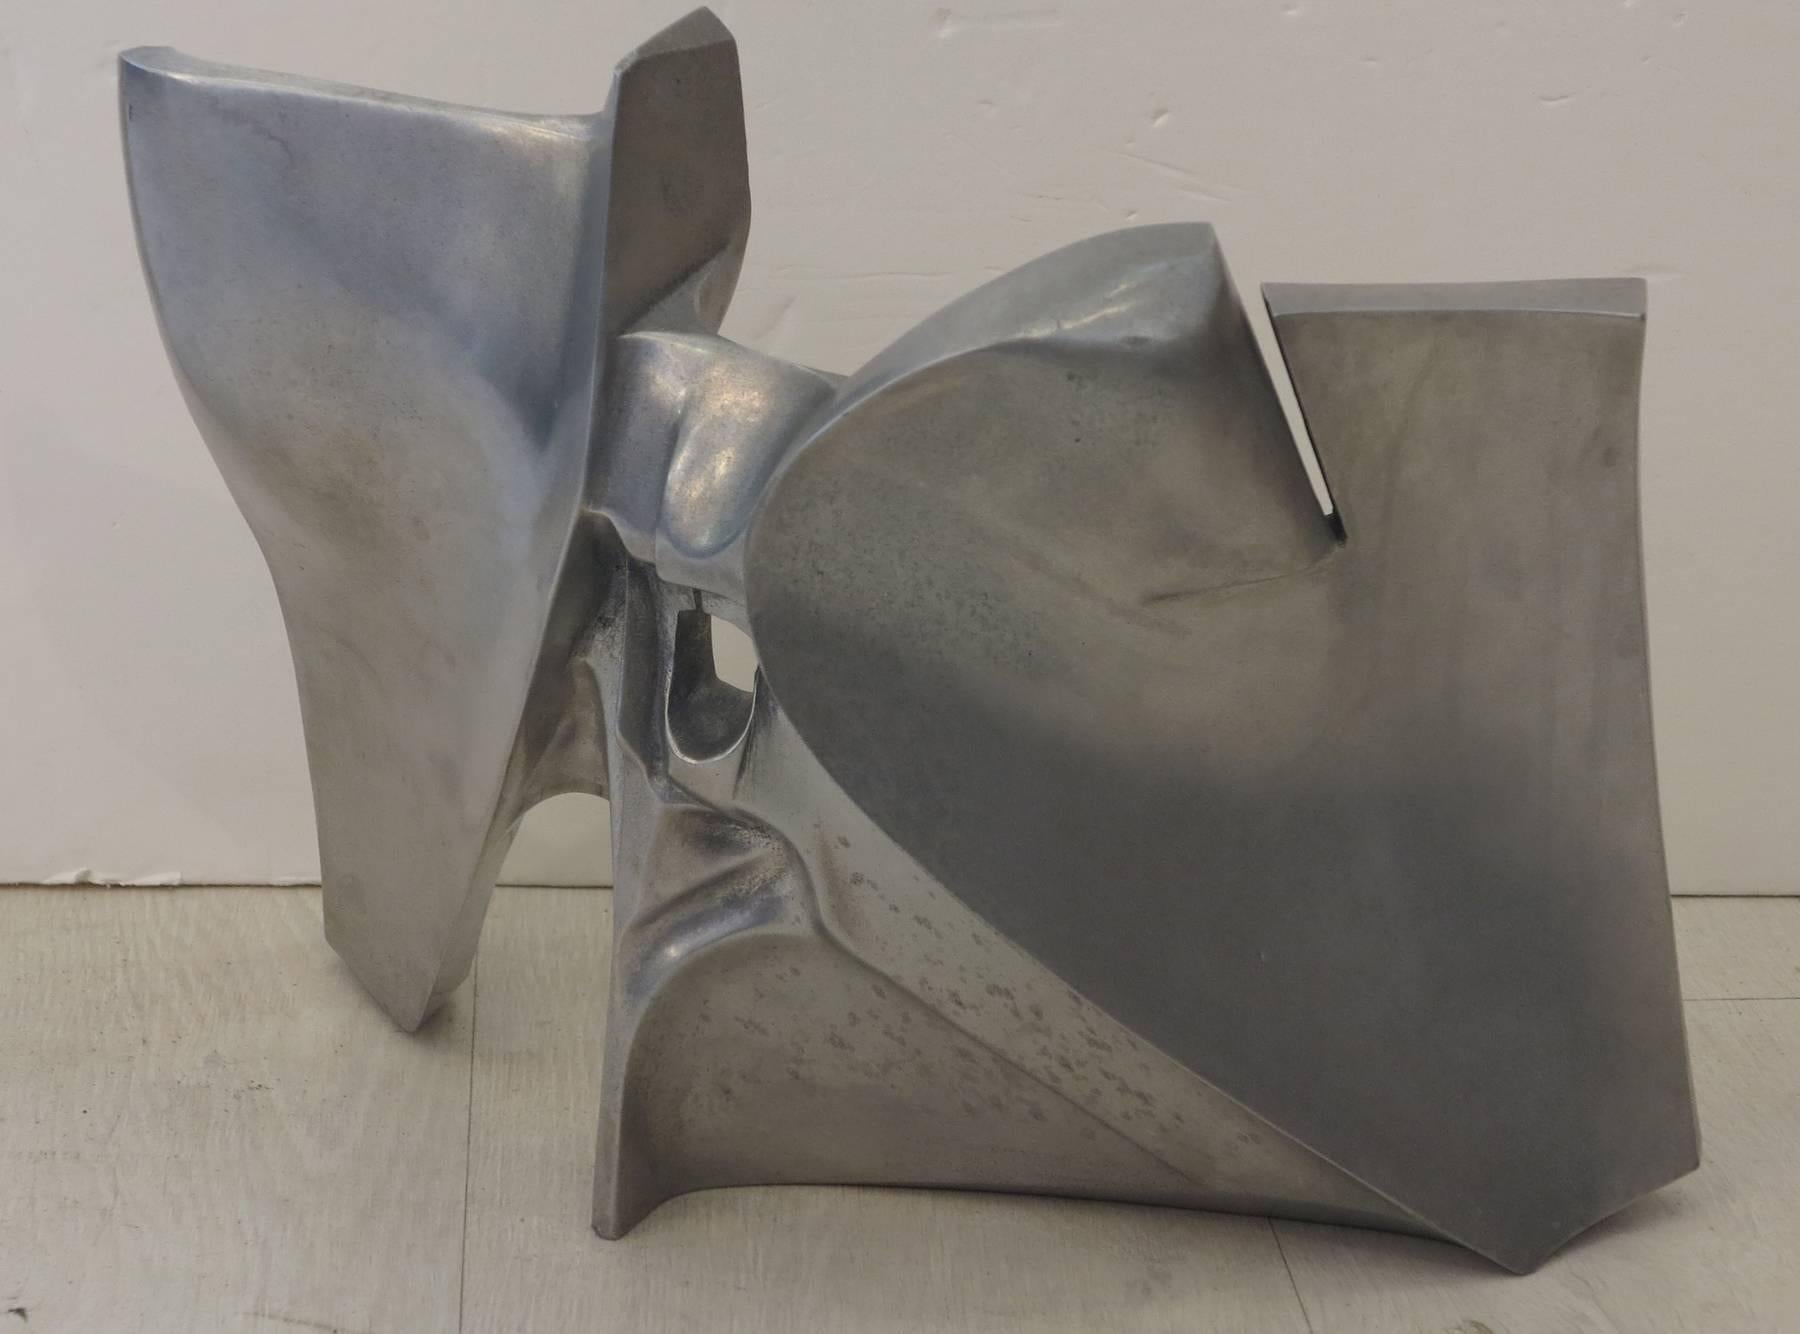 Cast and polished aluminium sculpture by Art Brenner, Paris, France. An original work of art one of three made. Signed by the artist.